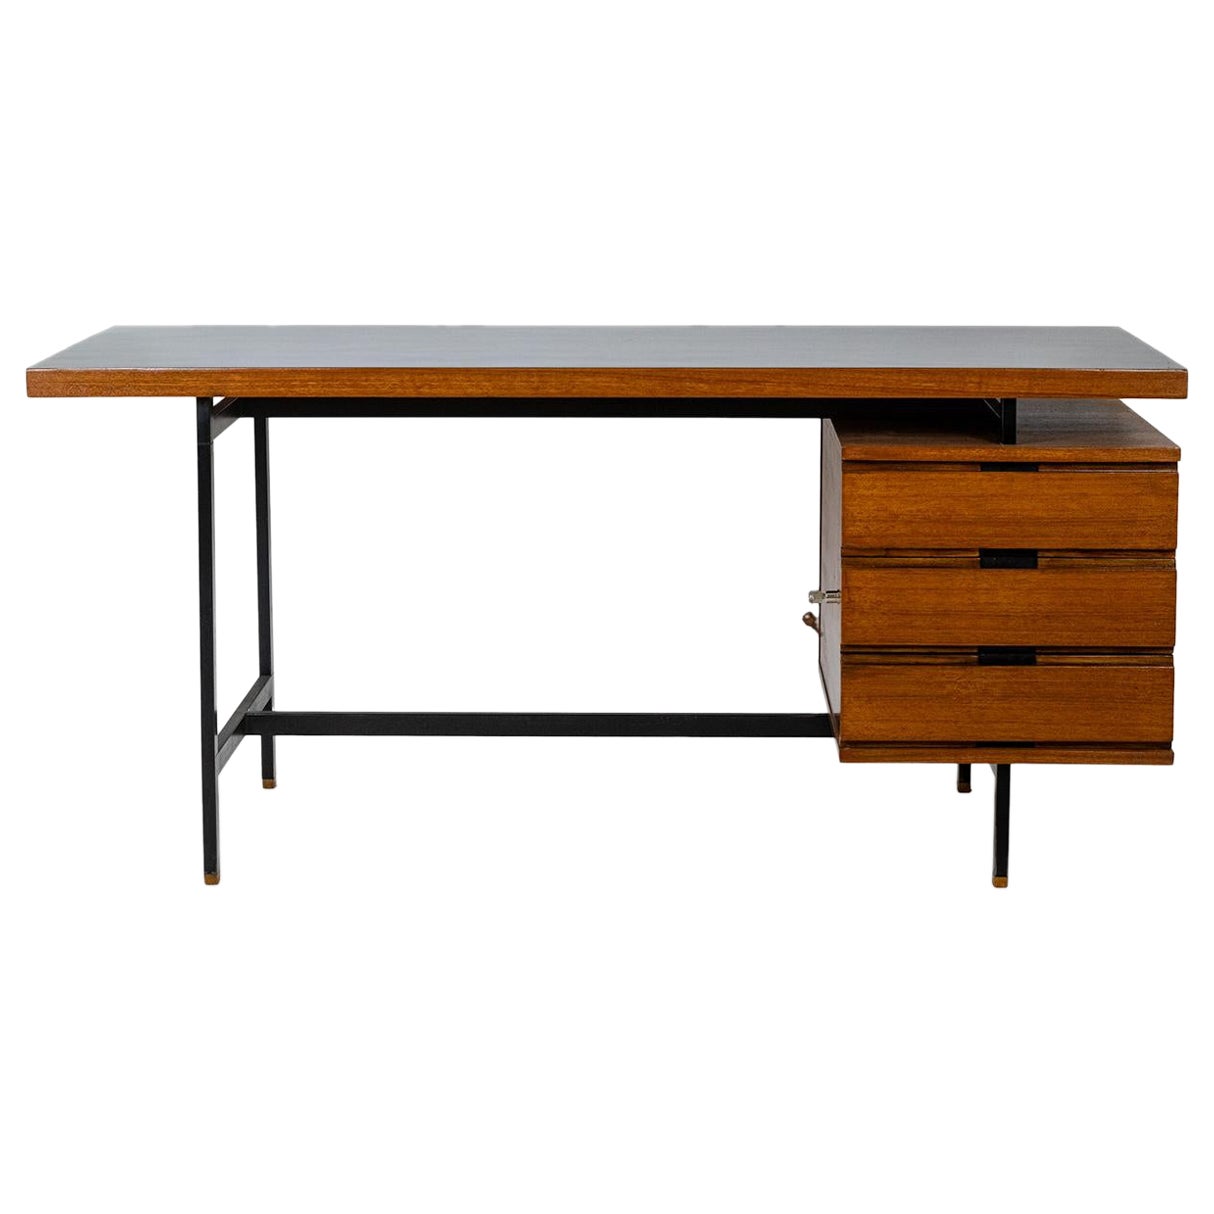 Pierre Guariche. Desk in teak and lacquered metal. 1960s. LS56631534M For Sale